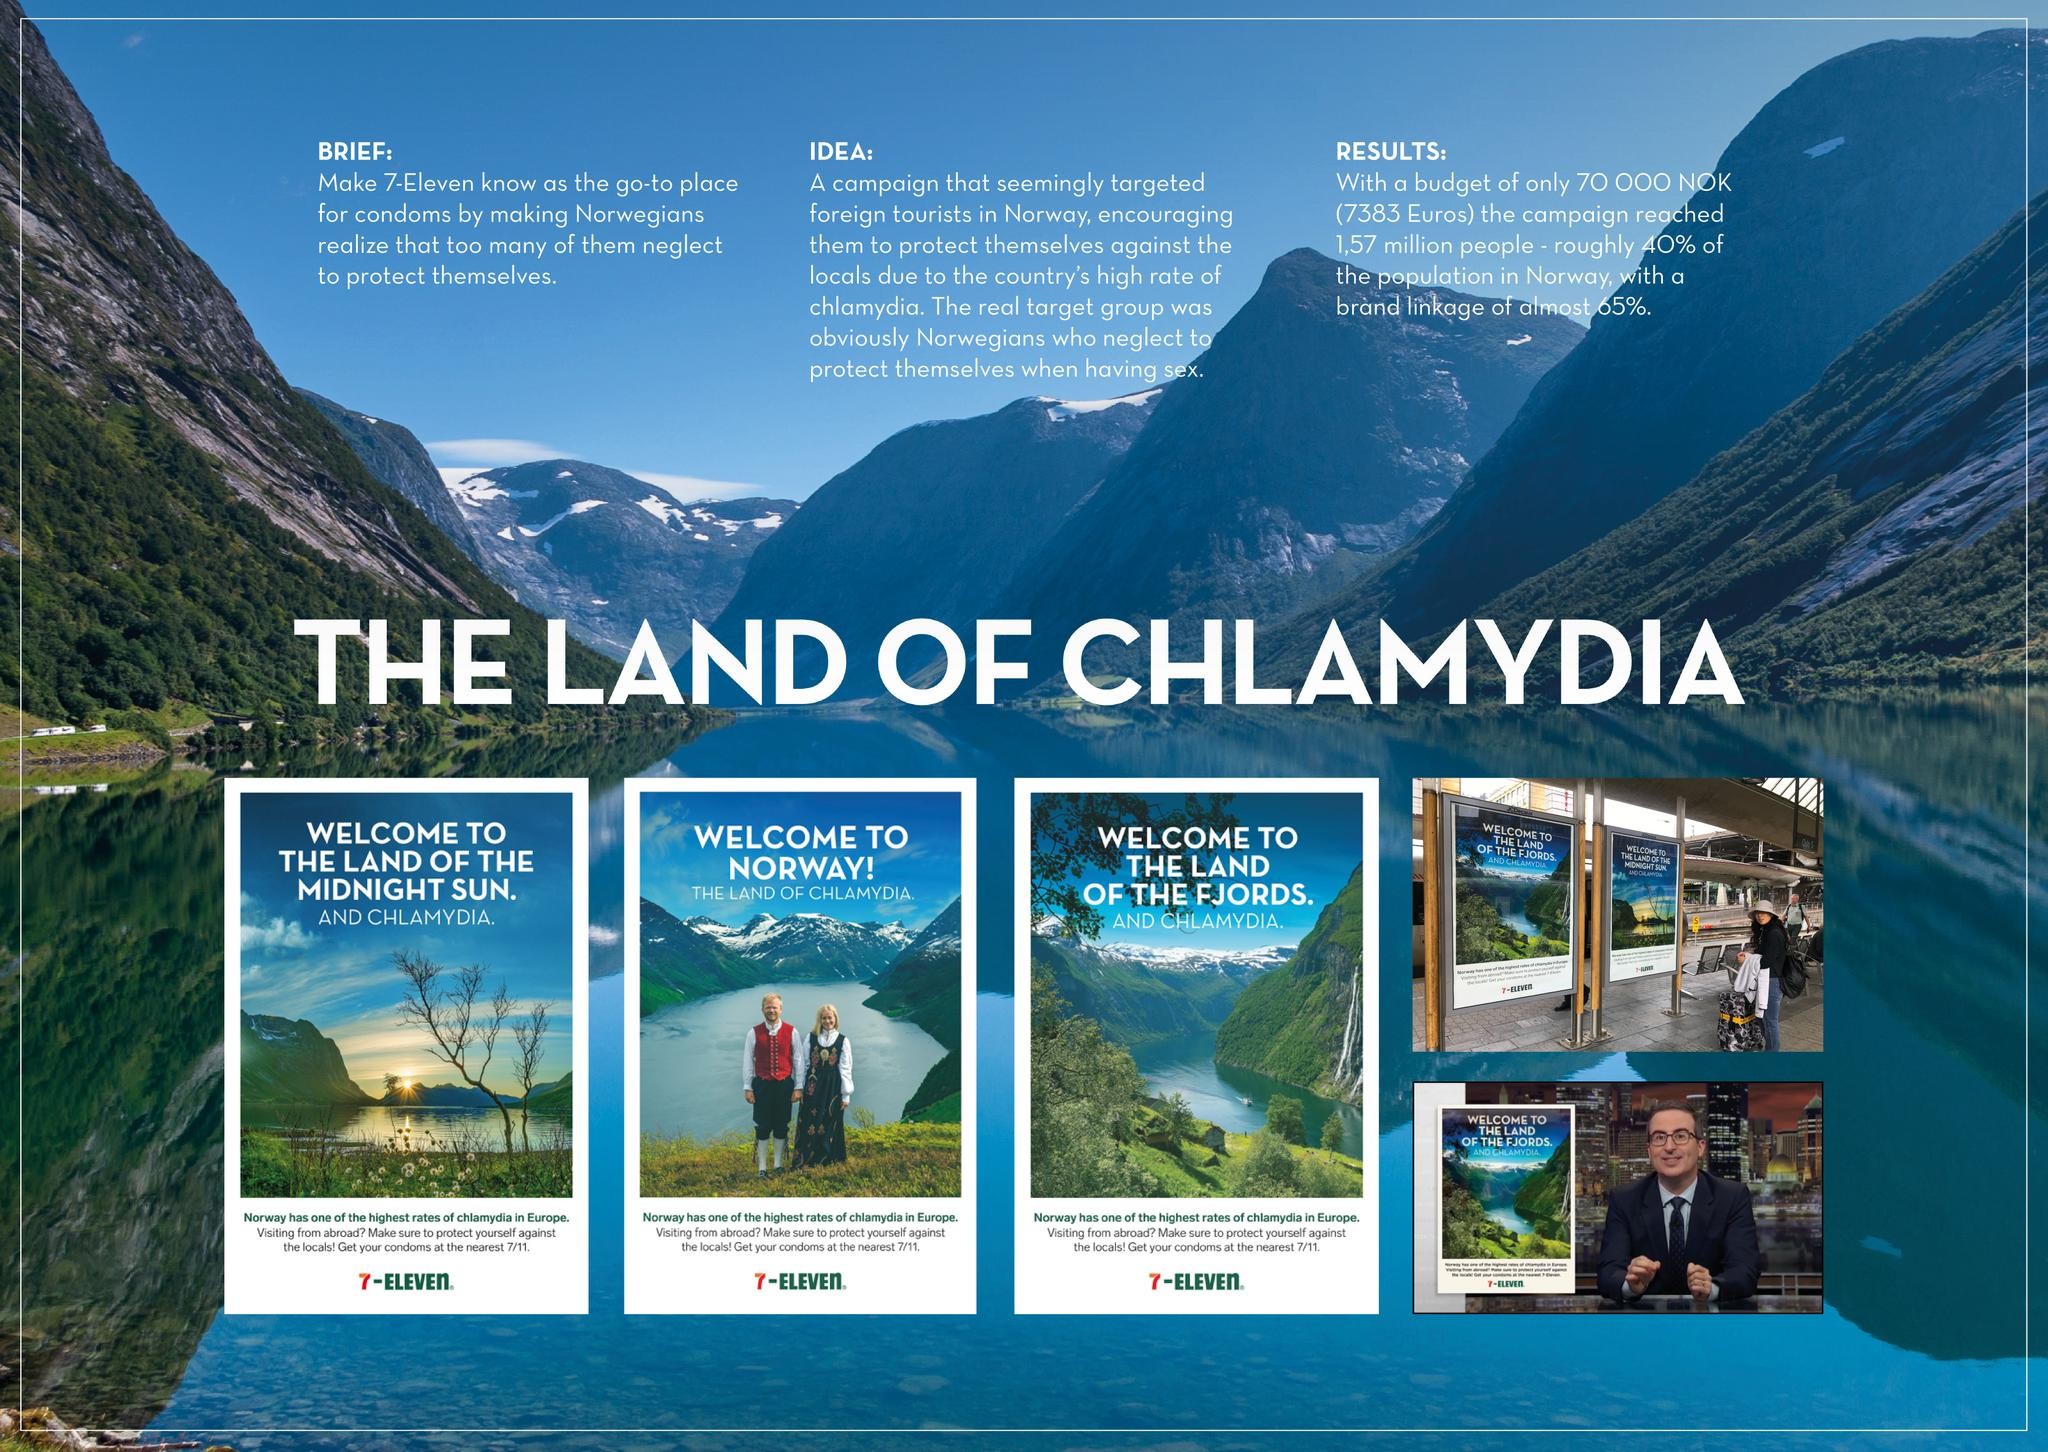 The Land of Chlamydia